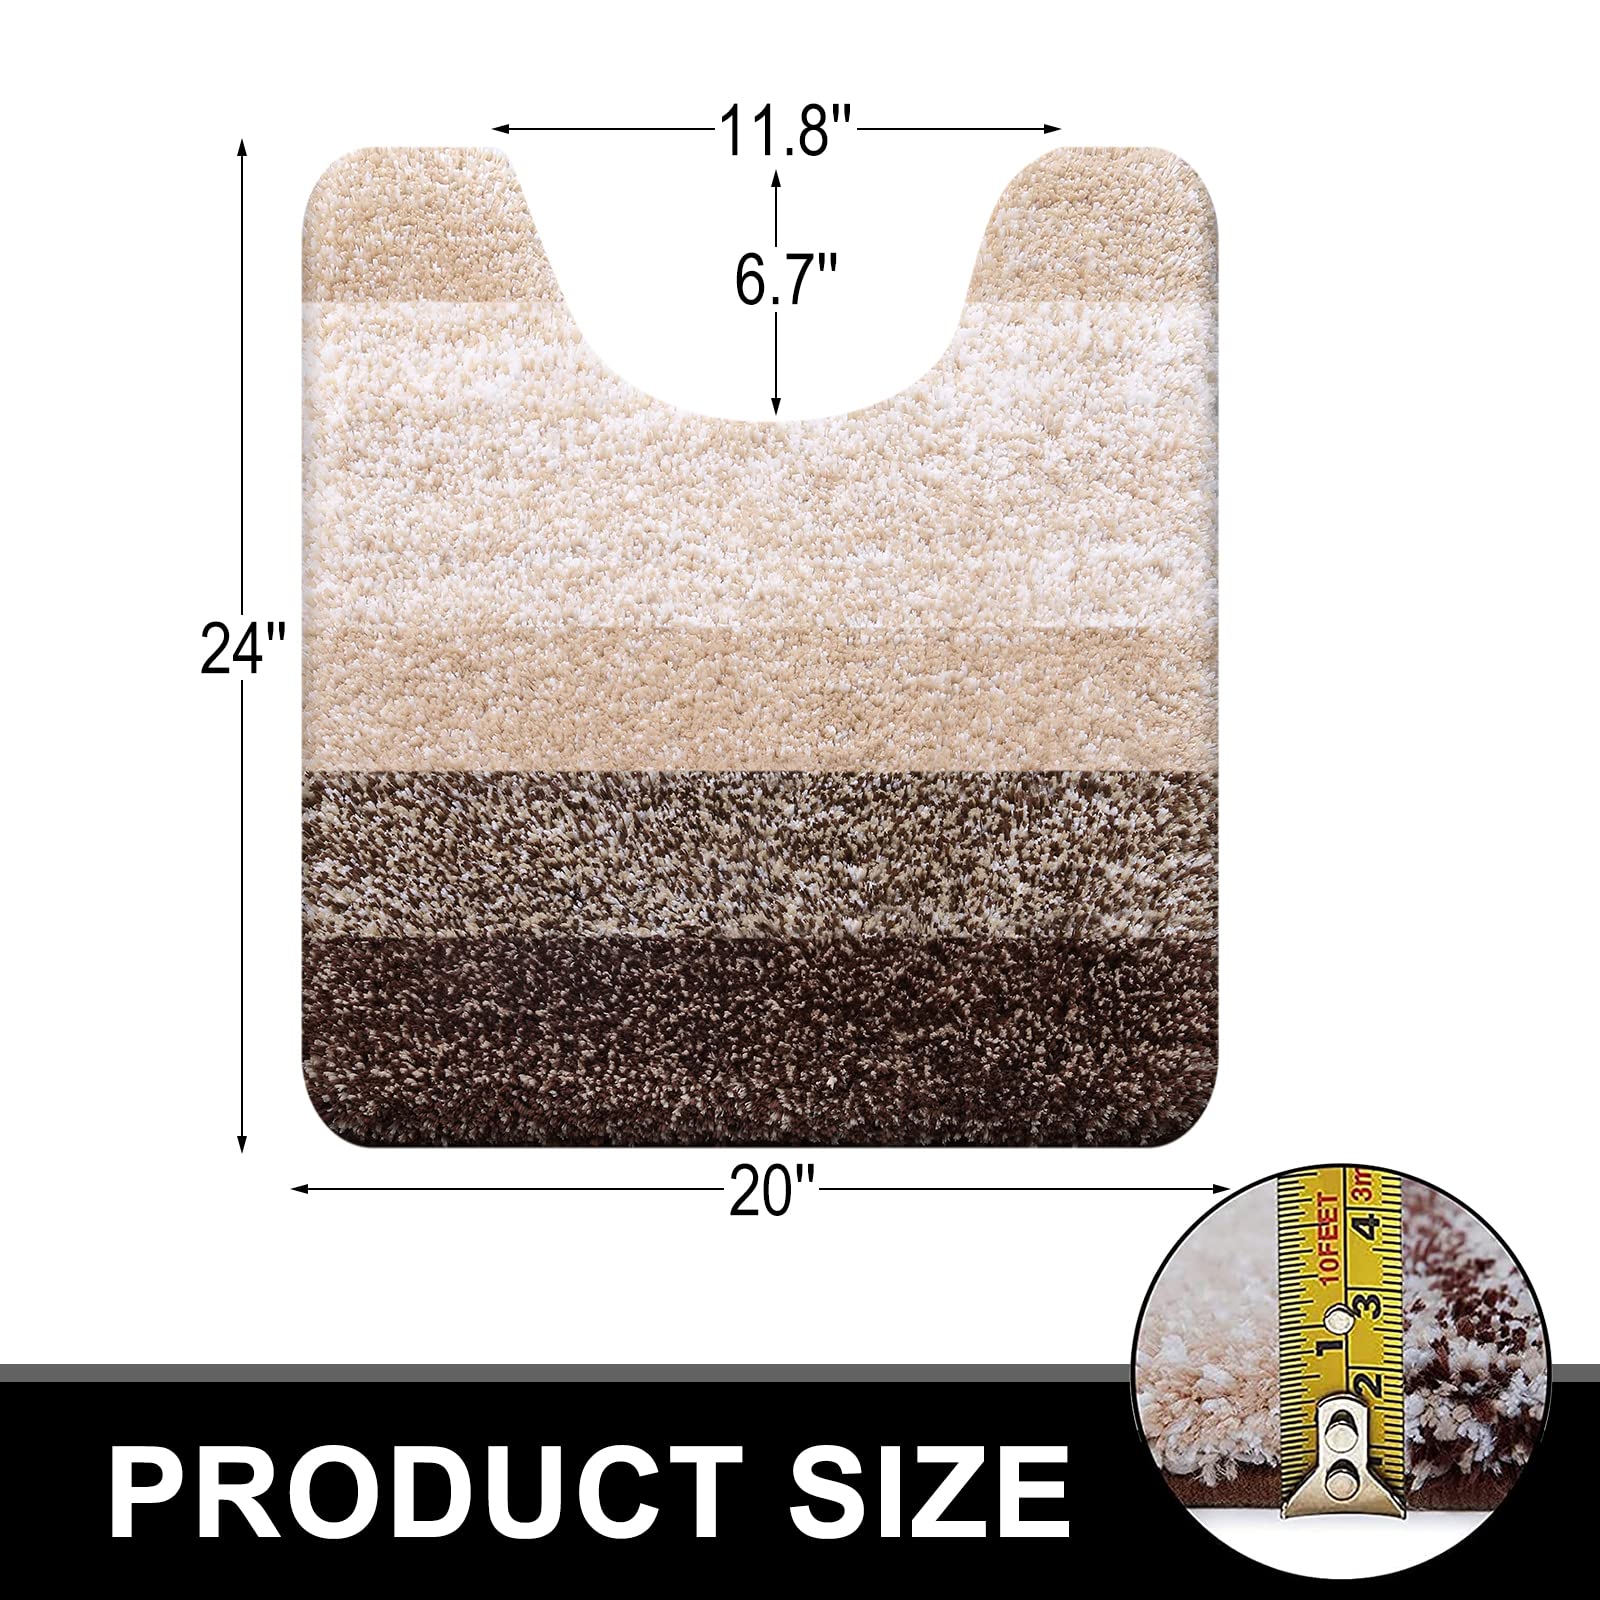 Buganda Luxury U-Shaped Bathroom Rugs, Super Soft and Absorbent Microfiber Toilet Bath Mats, Non-Slip Contour Bathroom Carpets with Rubber Backing, 20X24, Brown - image 2 of 7